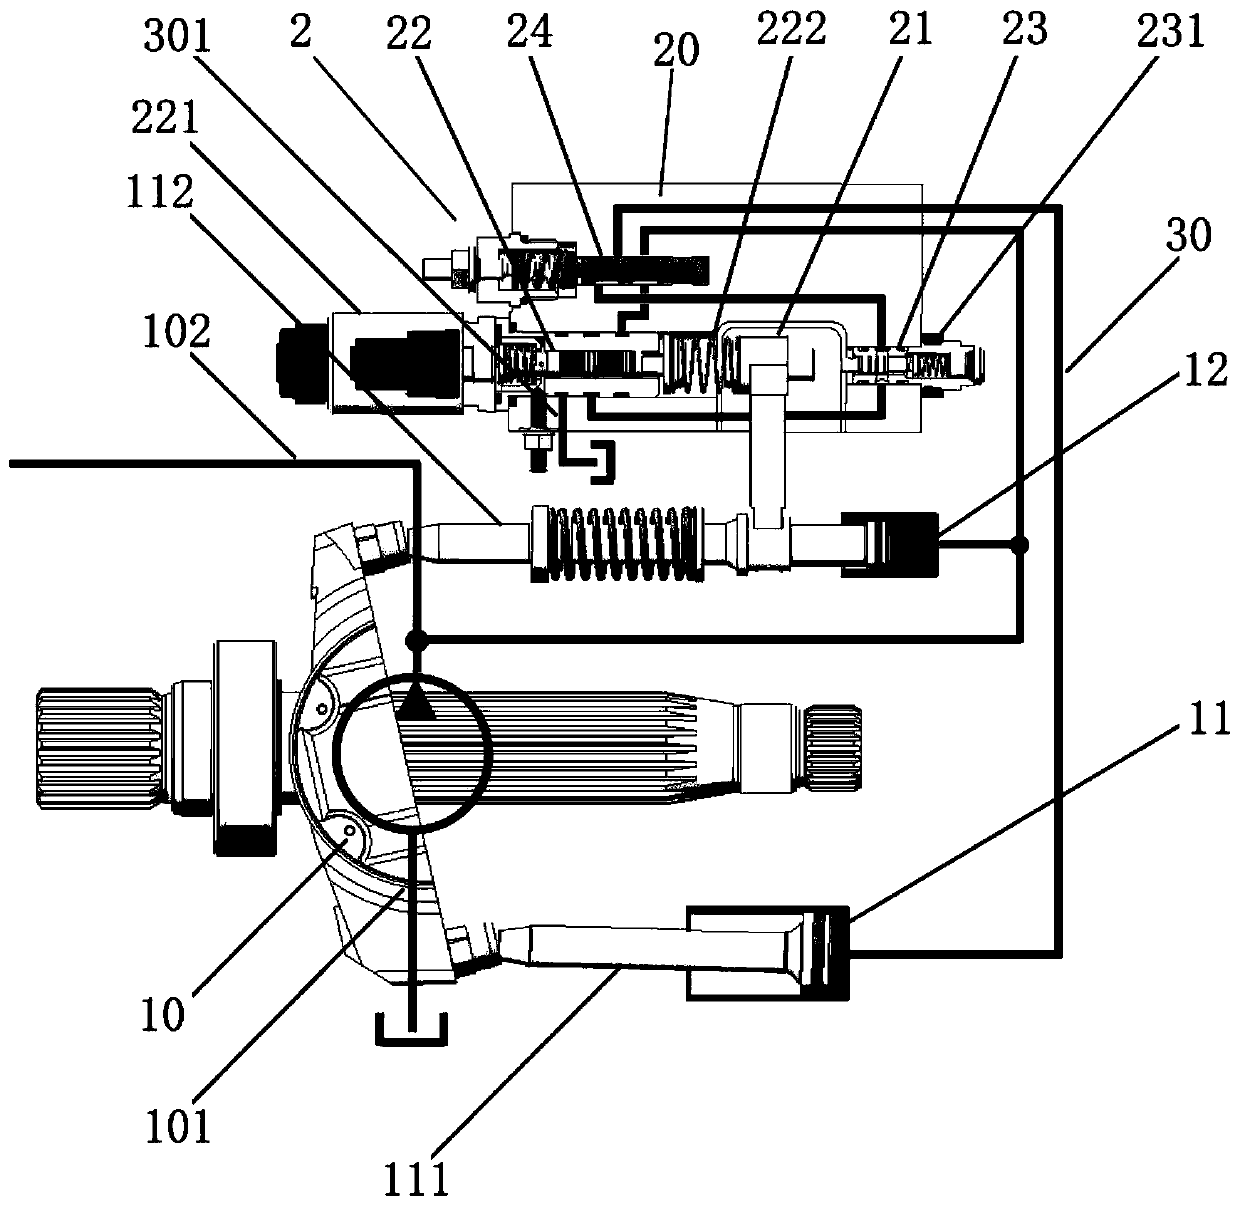 Integrated control system of piston variable pump